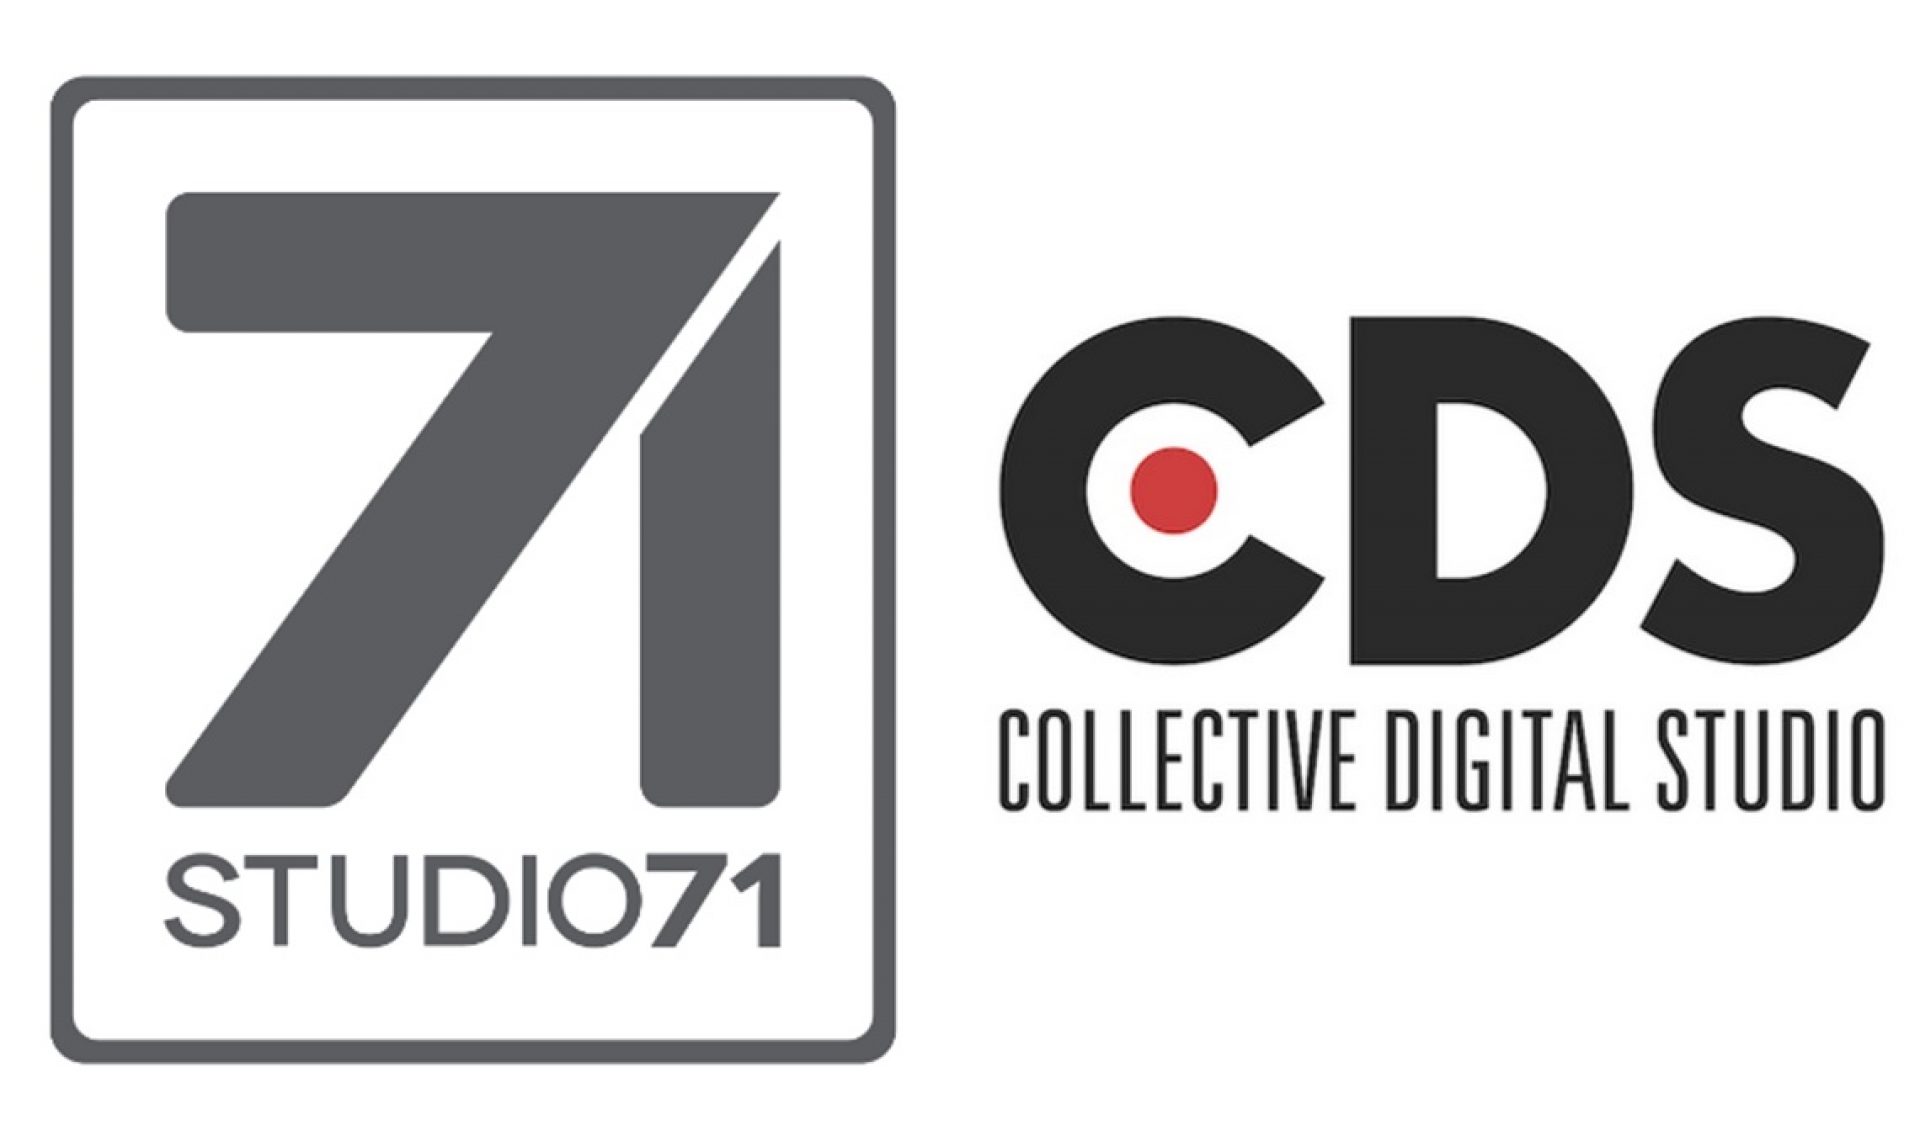 Collective Digital Studio Will Be Rebranded As Part Of Studio71